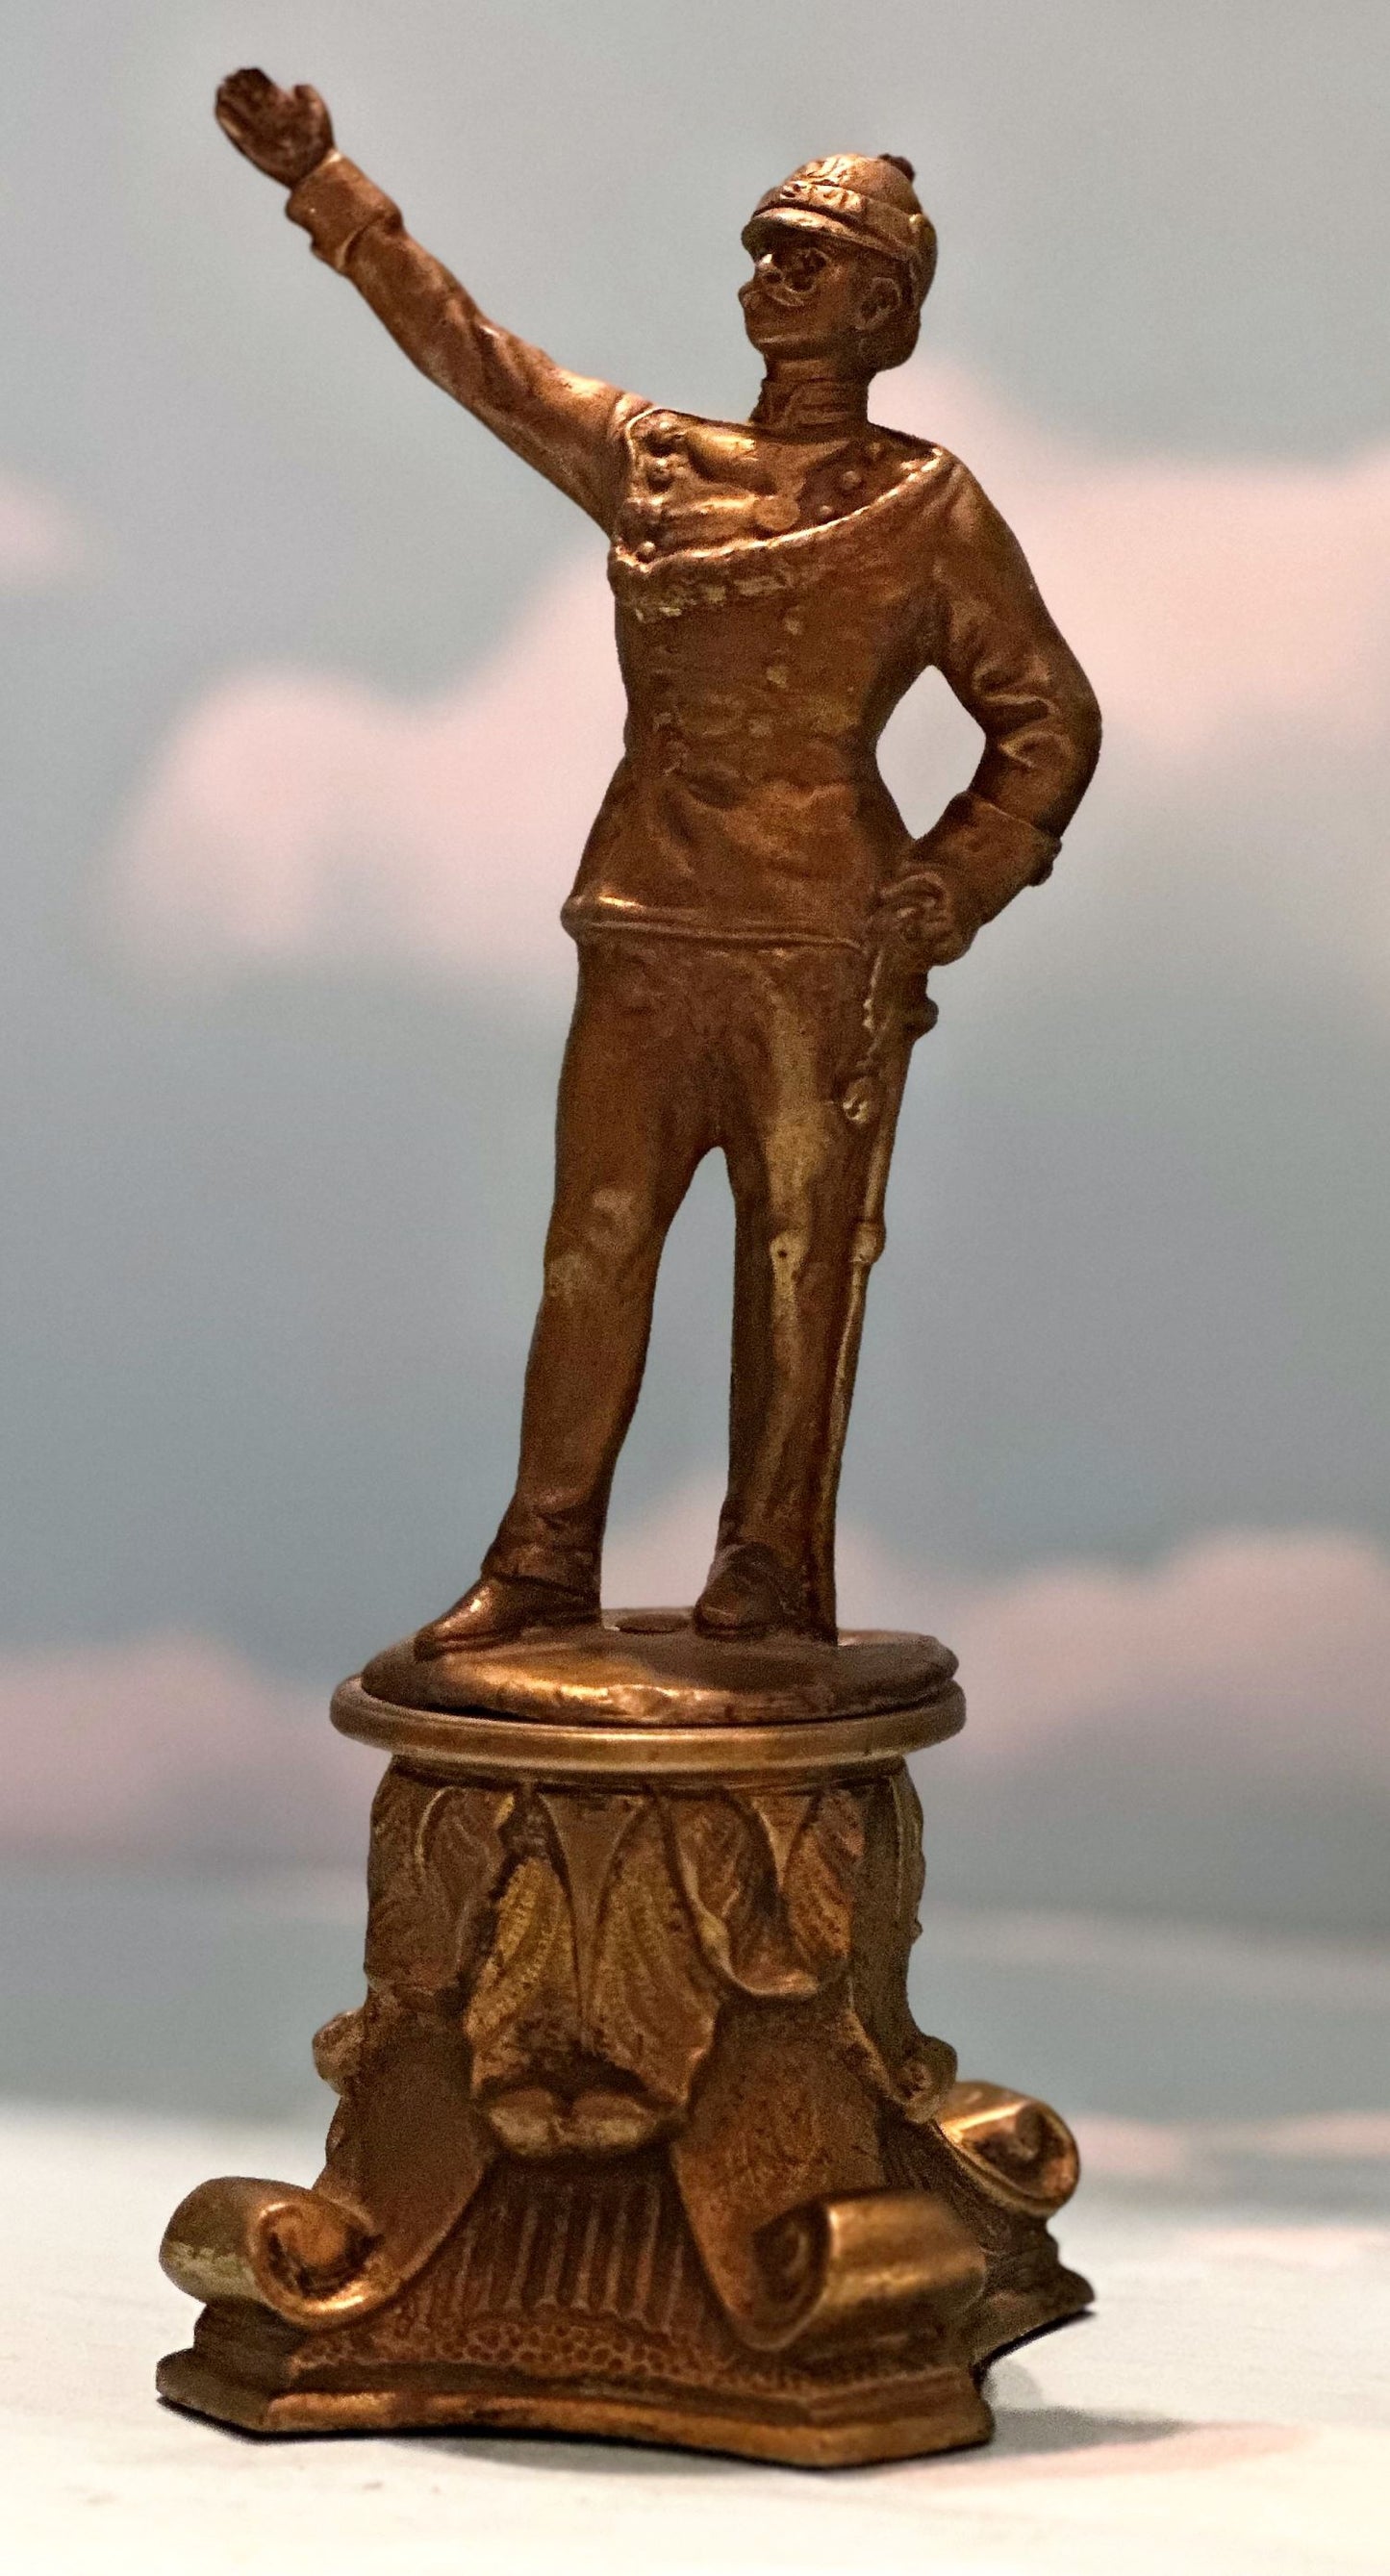 Germany Statute of Artillery Officer - Derrittmeister Militaria Group